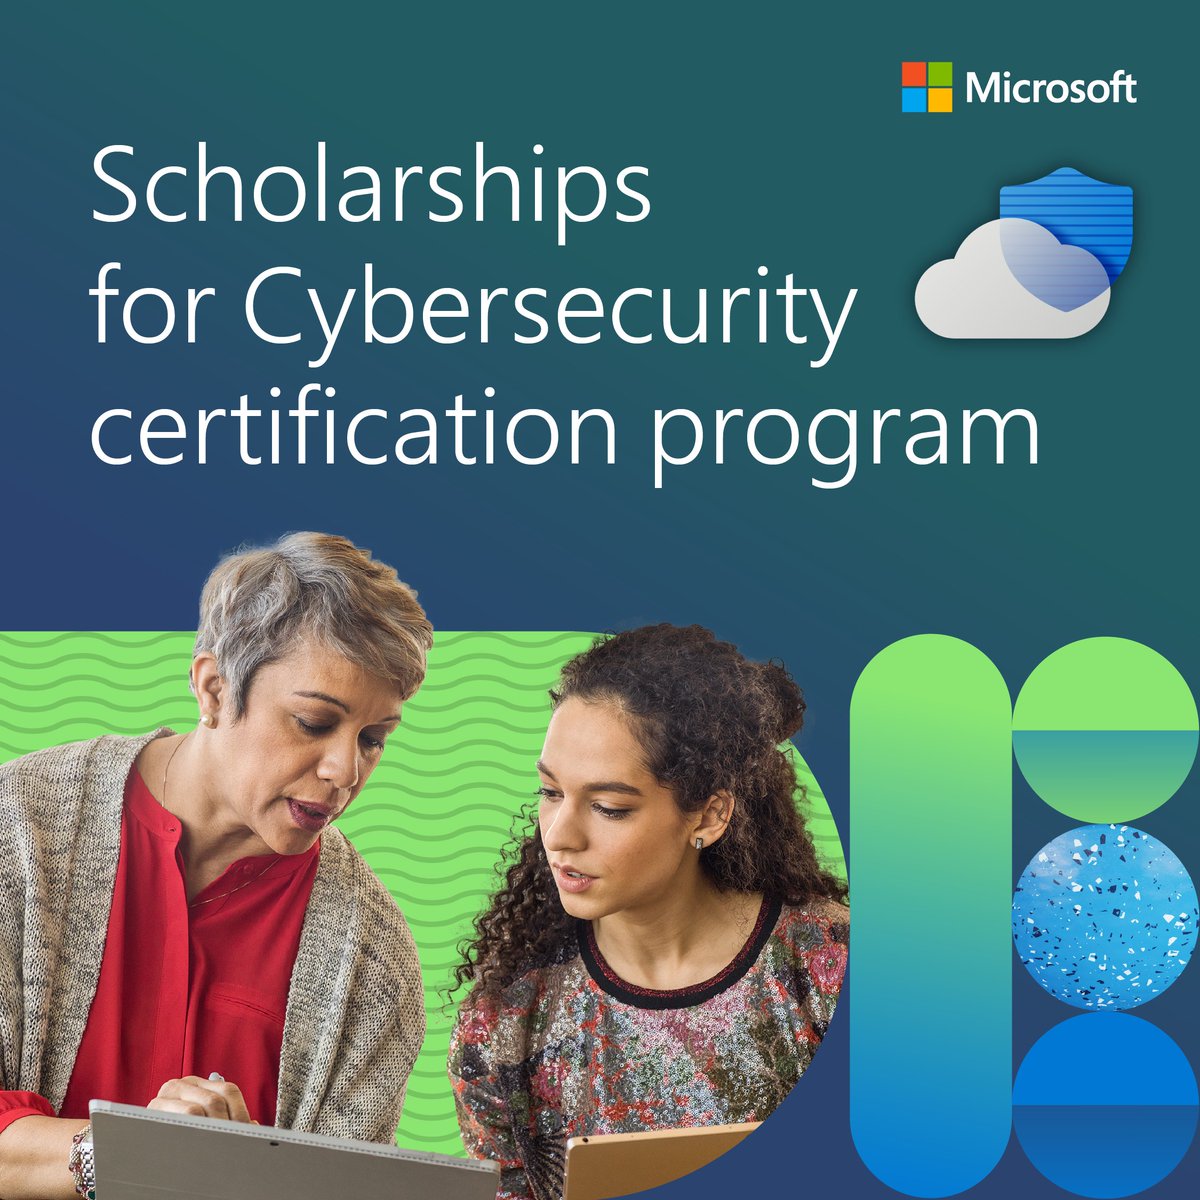 The sky’s the limit for women in tech. 💫​
​
#MicrosoftEDU is proud to partner with @womenincloud to offer the cybersecurity certification program to 5,000 women. Learn more at #MicrosoftReimagine: youtube.com/live/Slj6H2lEK…